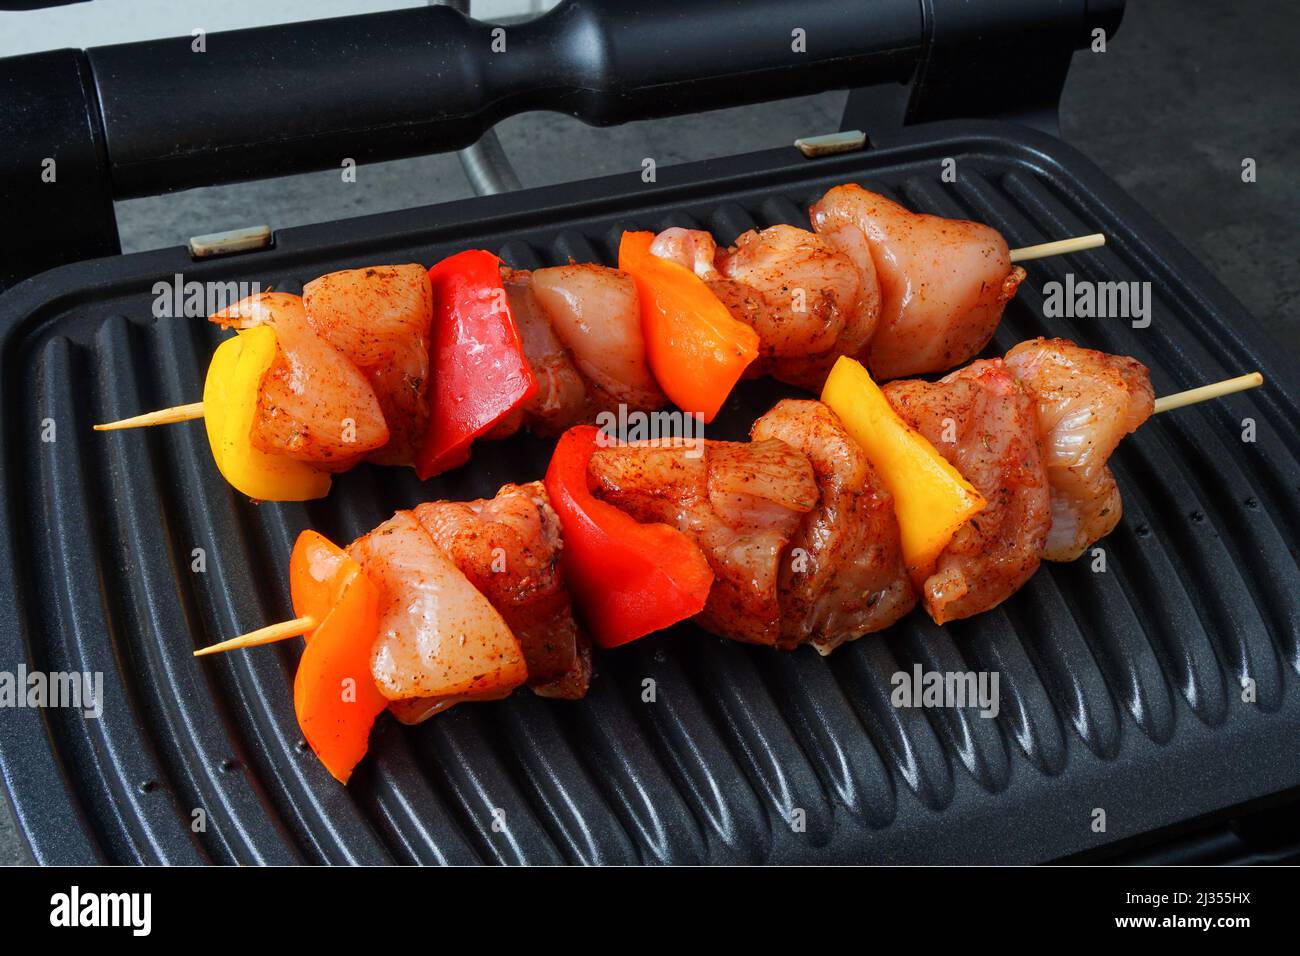 Chicken and vegetables skewers cooked on electric indoor grill. Stock Photo